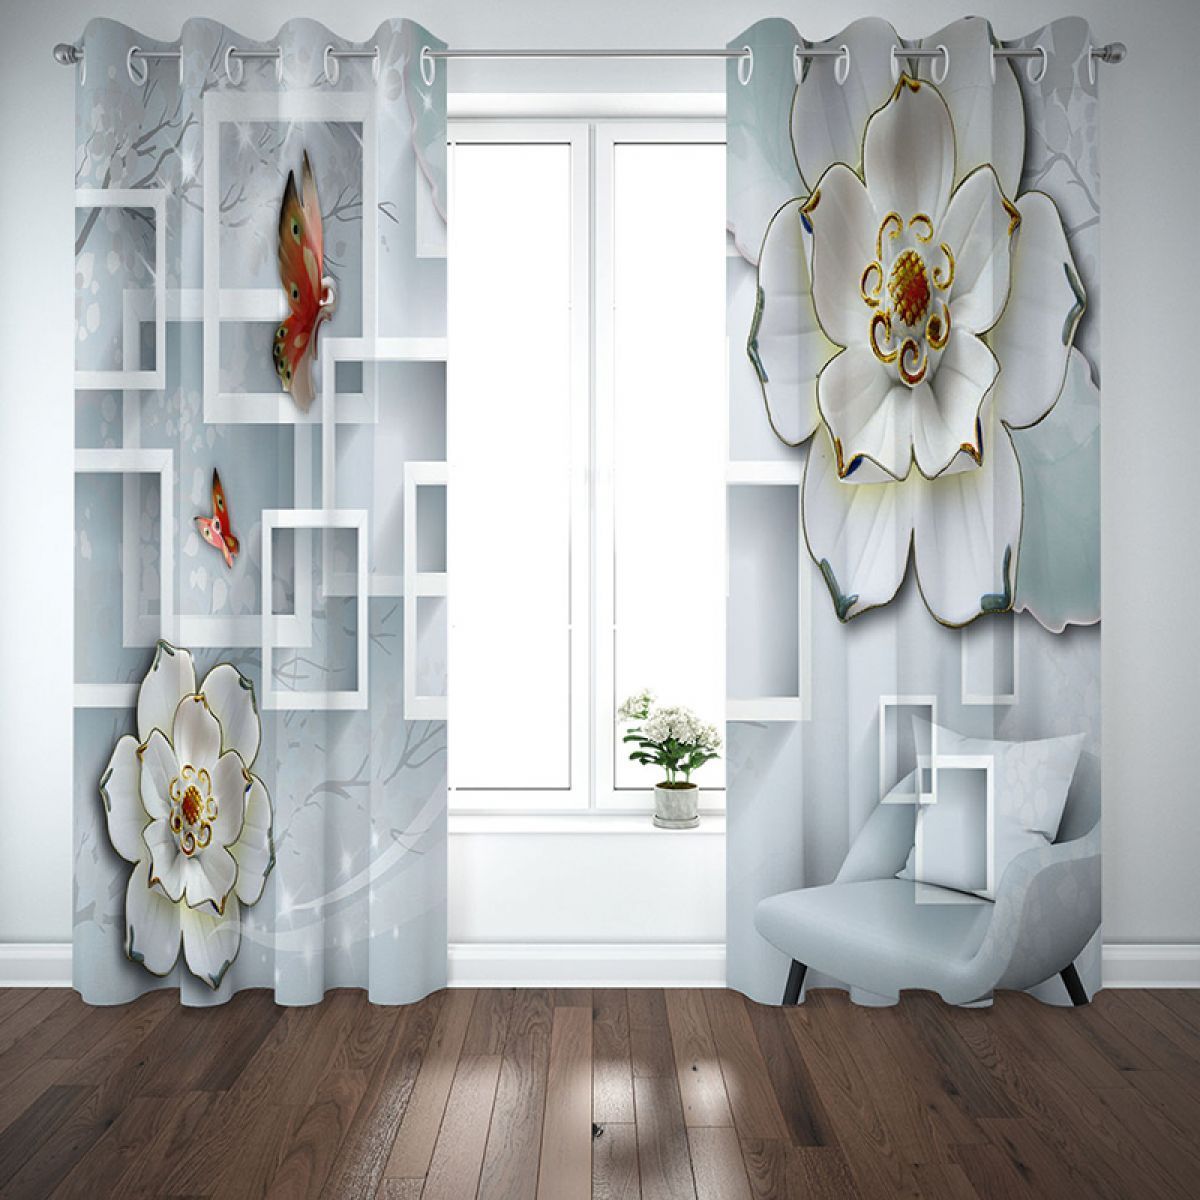 Ceramic Flowers And Butterflies Printed Window Curtain Home Decor